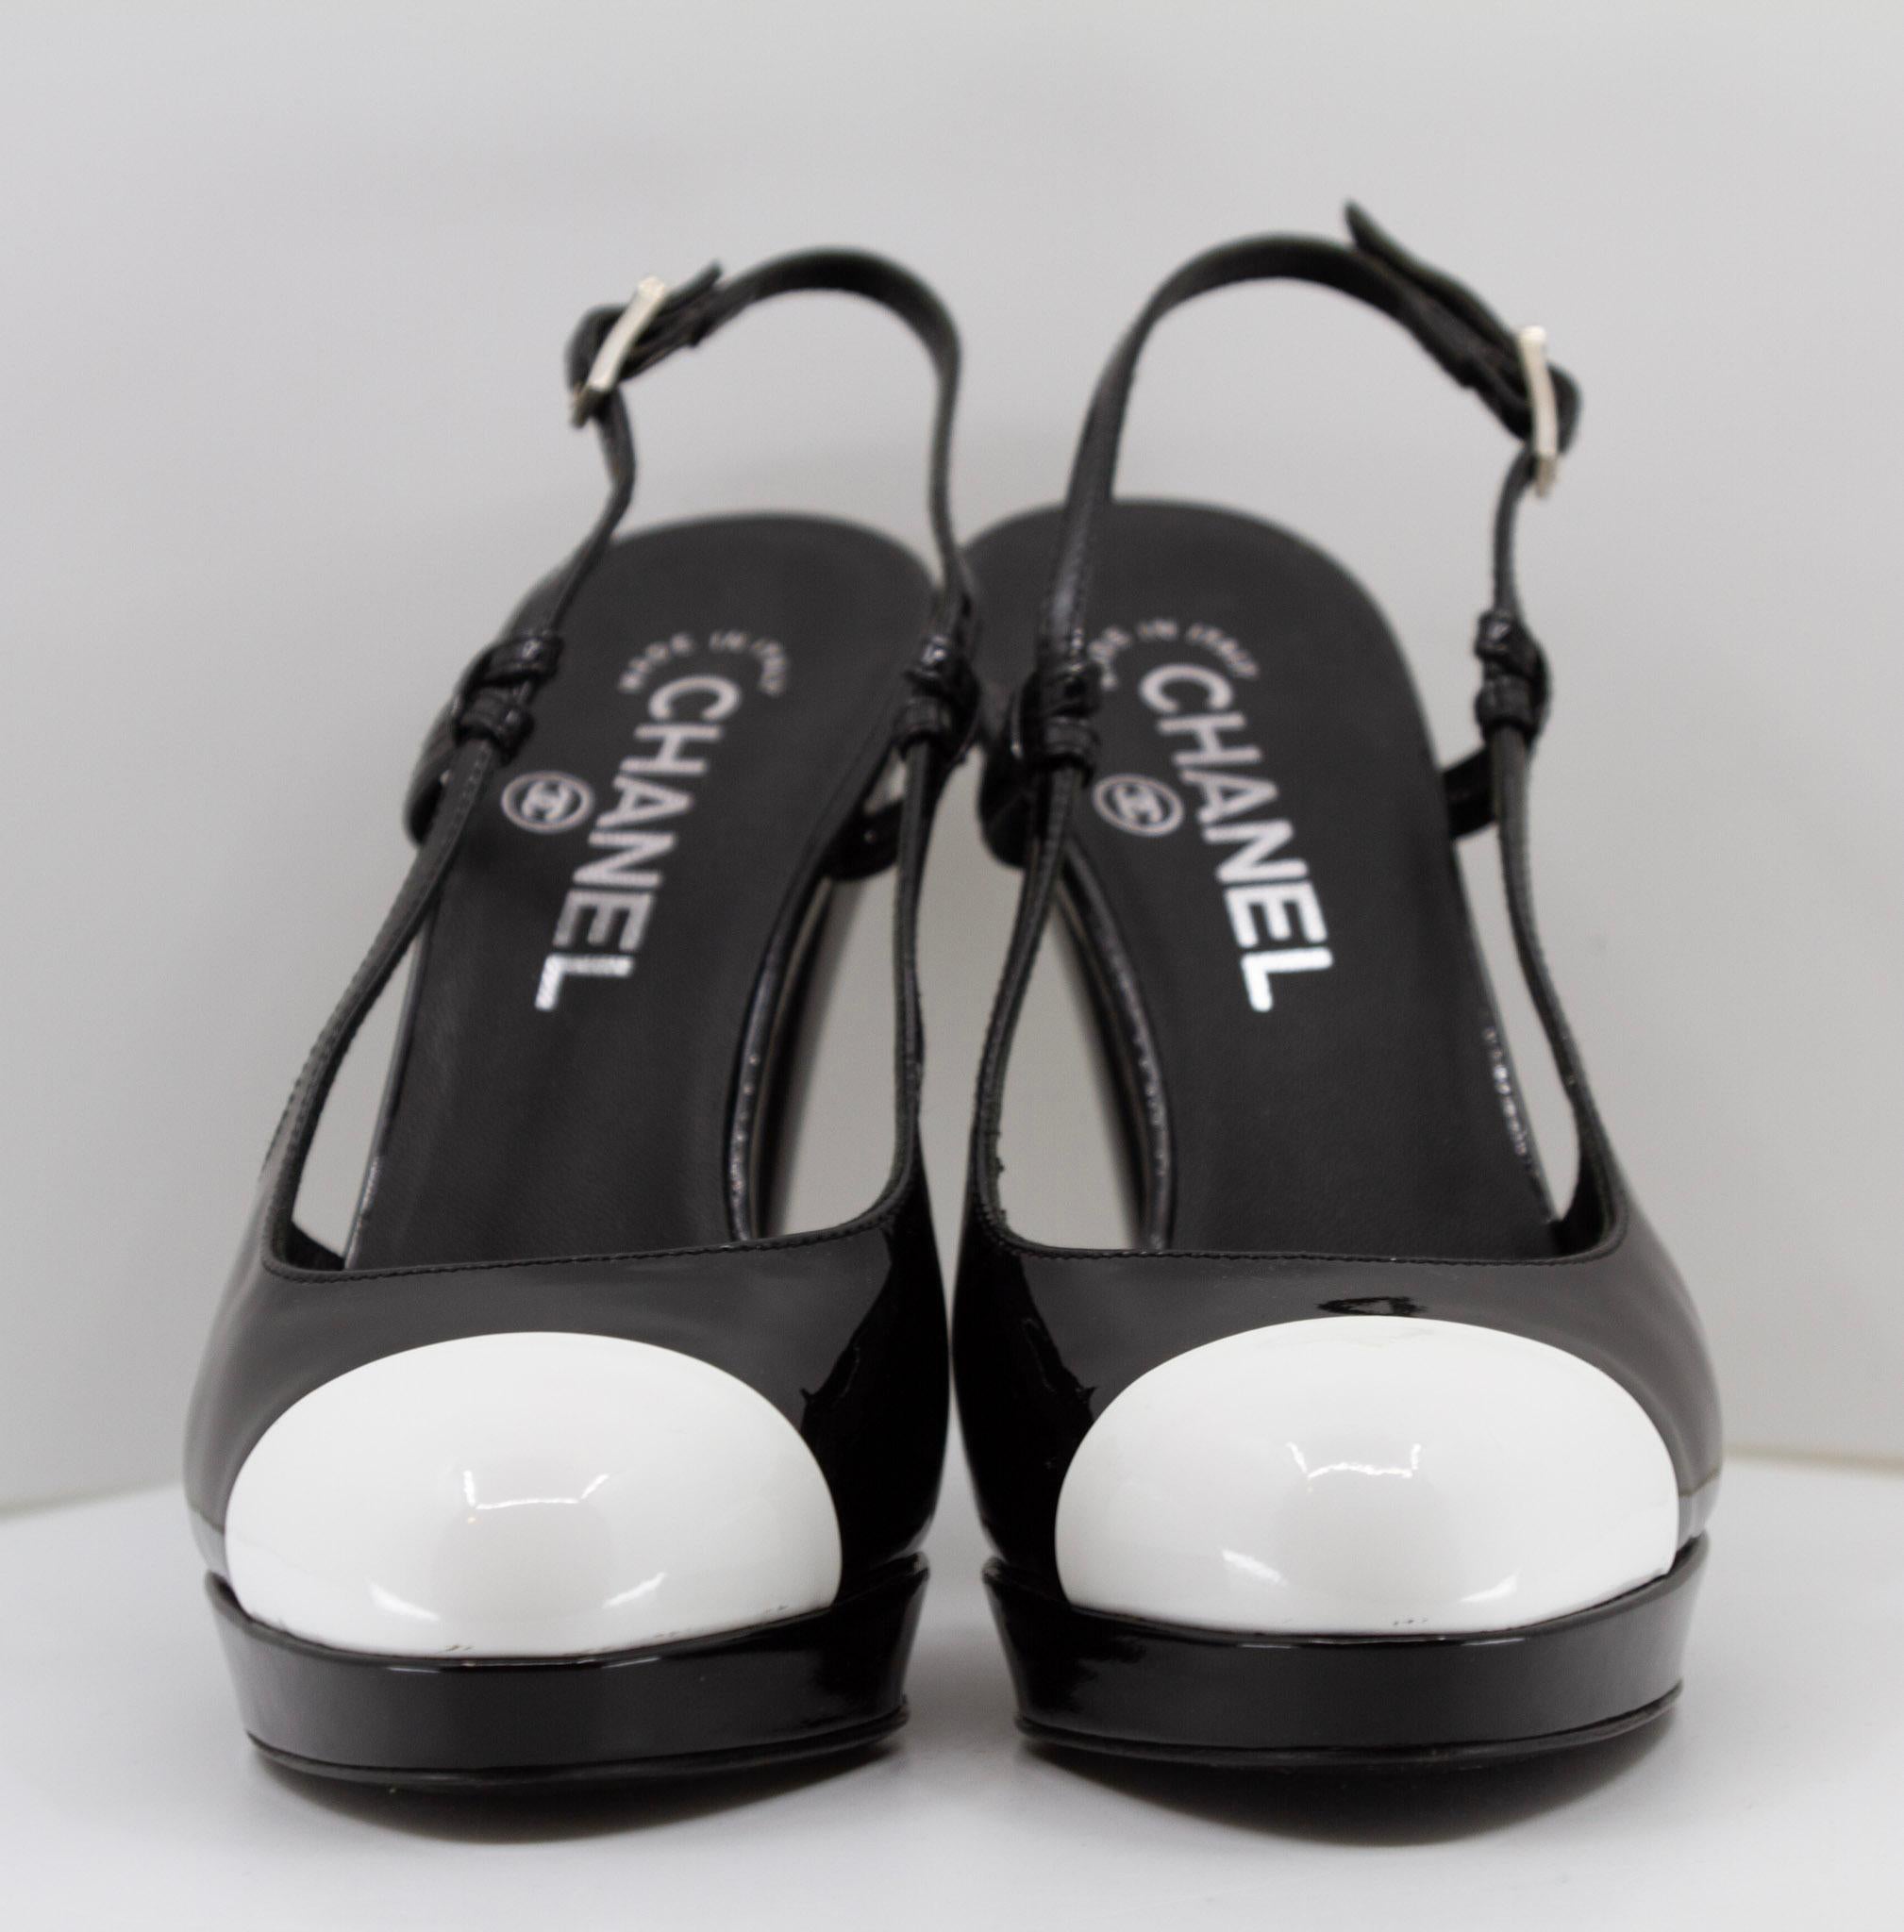 Chanel 2008 Black & White Patent Leather Slingback Heels  In Excellent Condition For Sale In Kingston, NY